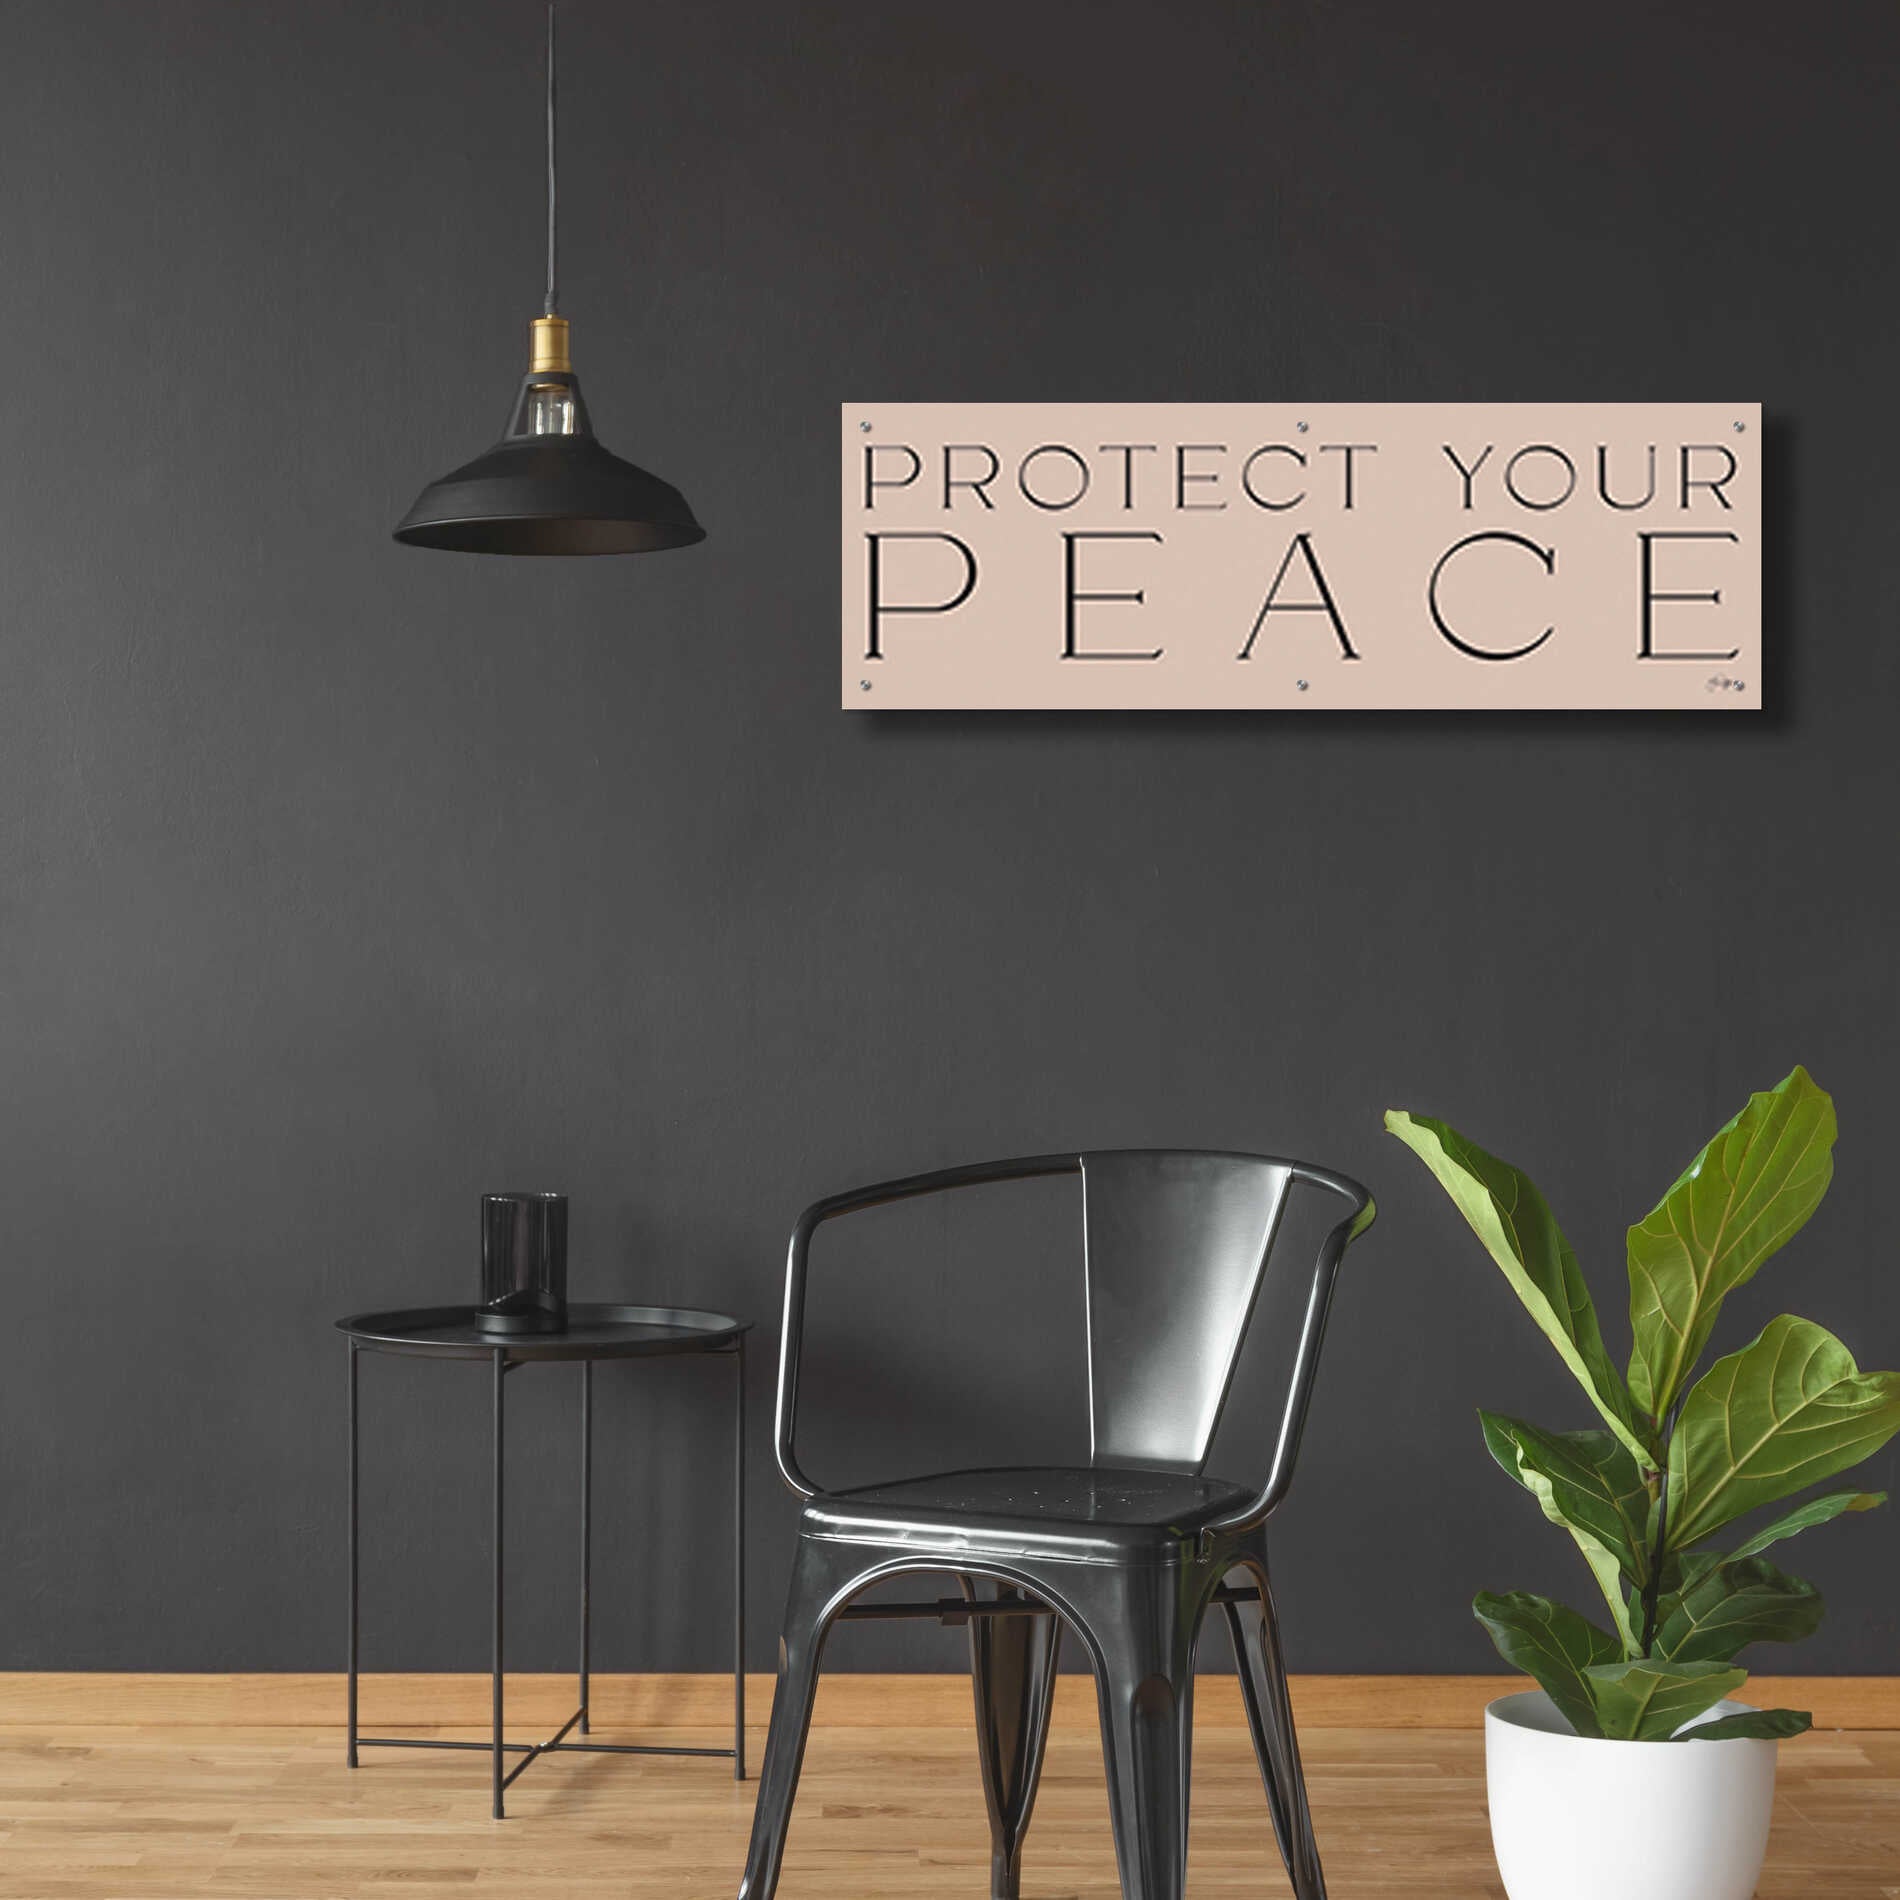 Epic Art 'Protect Your Peace' by Yass Naffas Designs, Acrylic Glass Wall Art,48x16